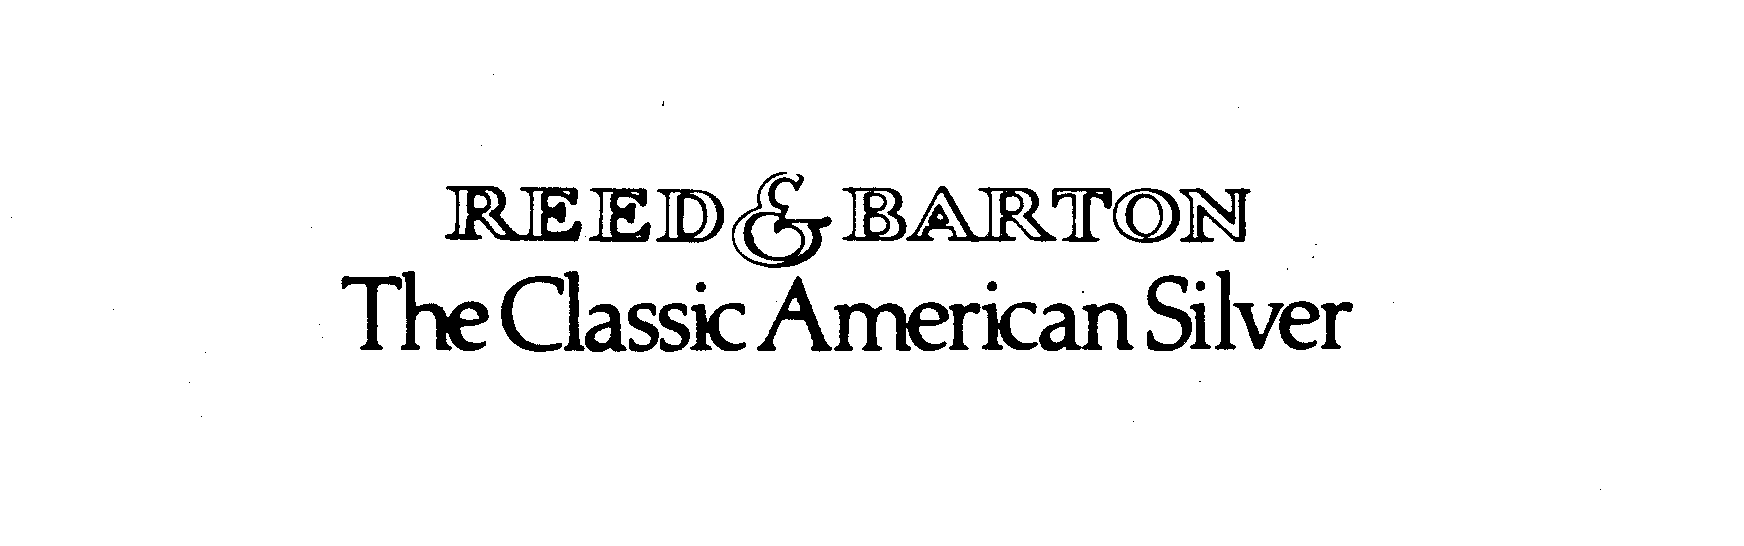  REED &amp; BARTON THE CLASSIC AMERICAN SILVER